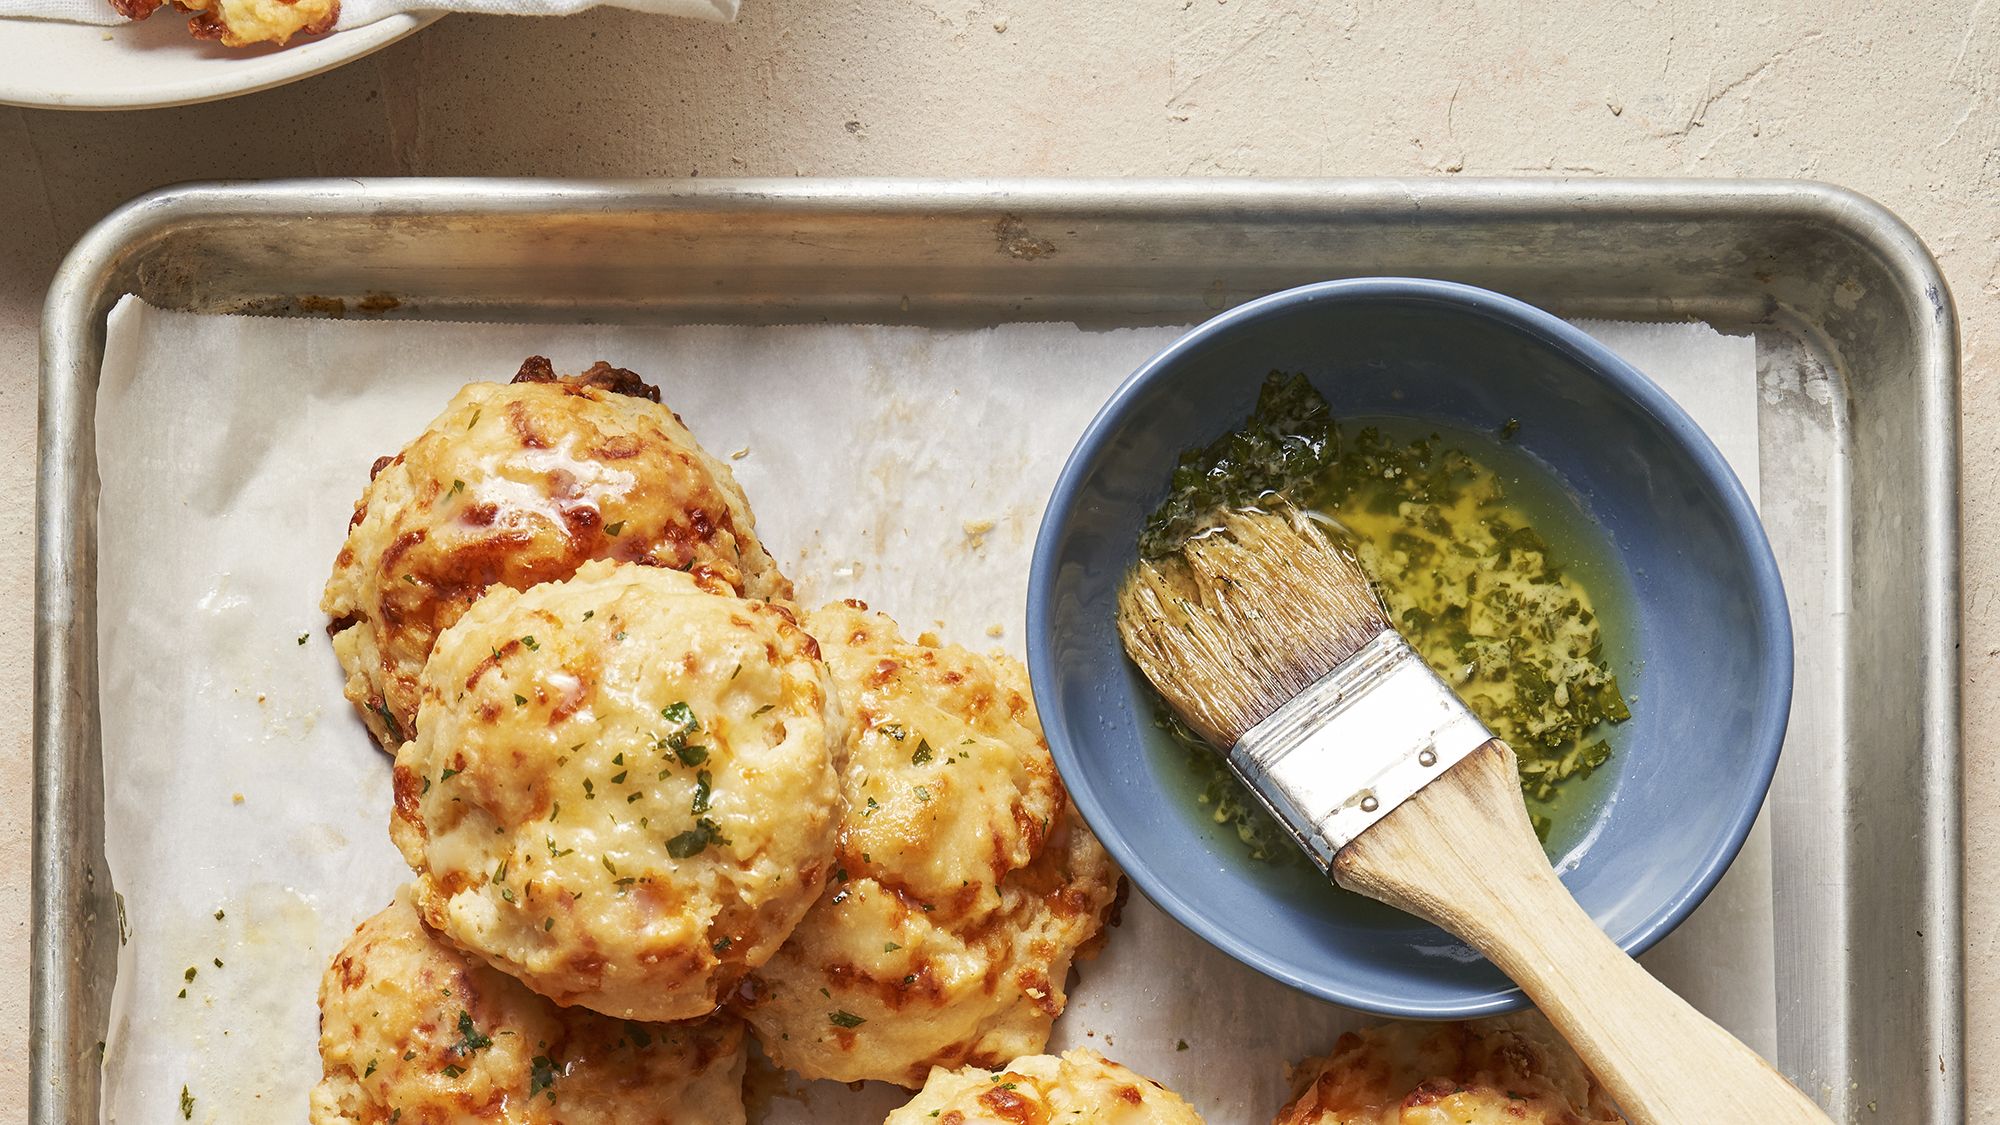 Red Lobster Cheddar Bay Biscuits (But Better)